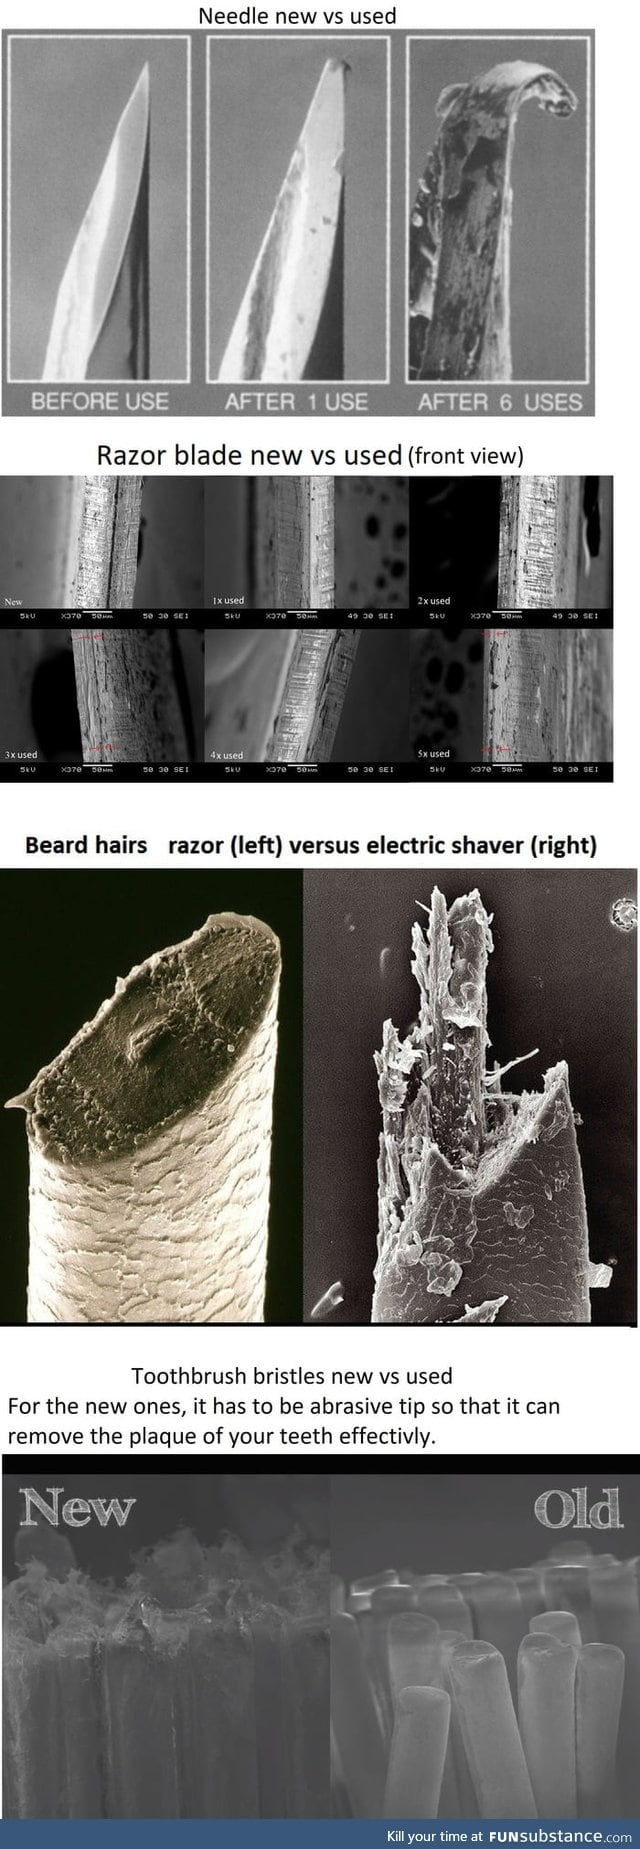 New vs Used: Things under a scanning electron microscope (SEM)